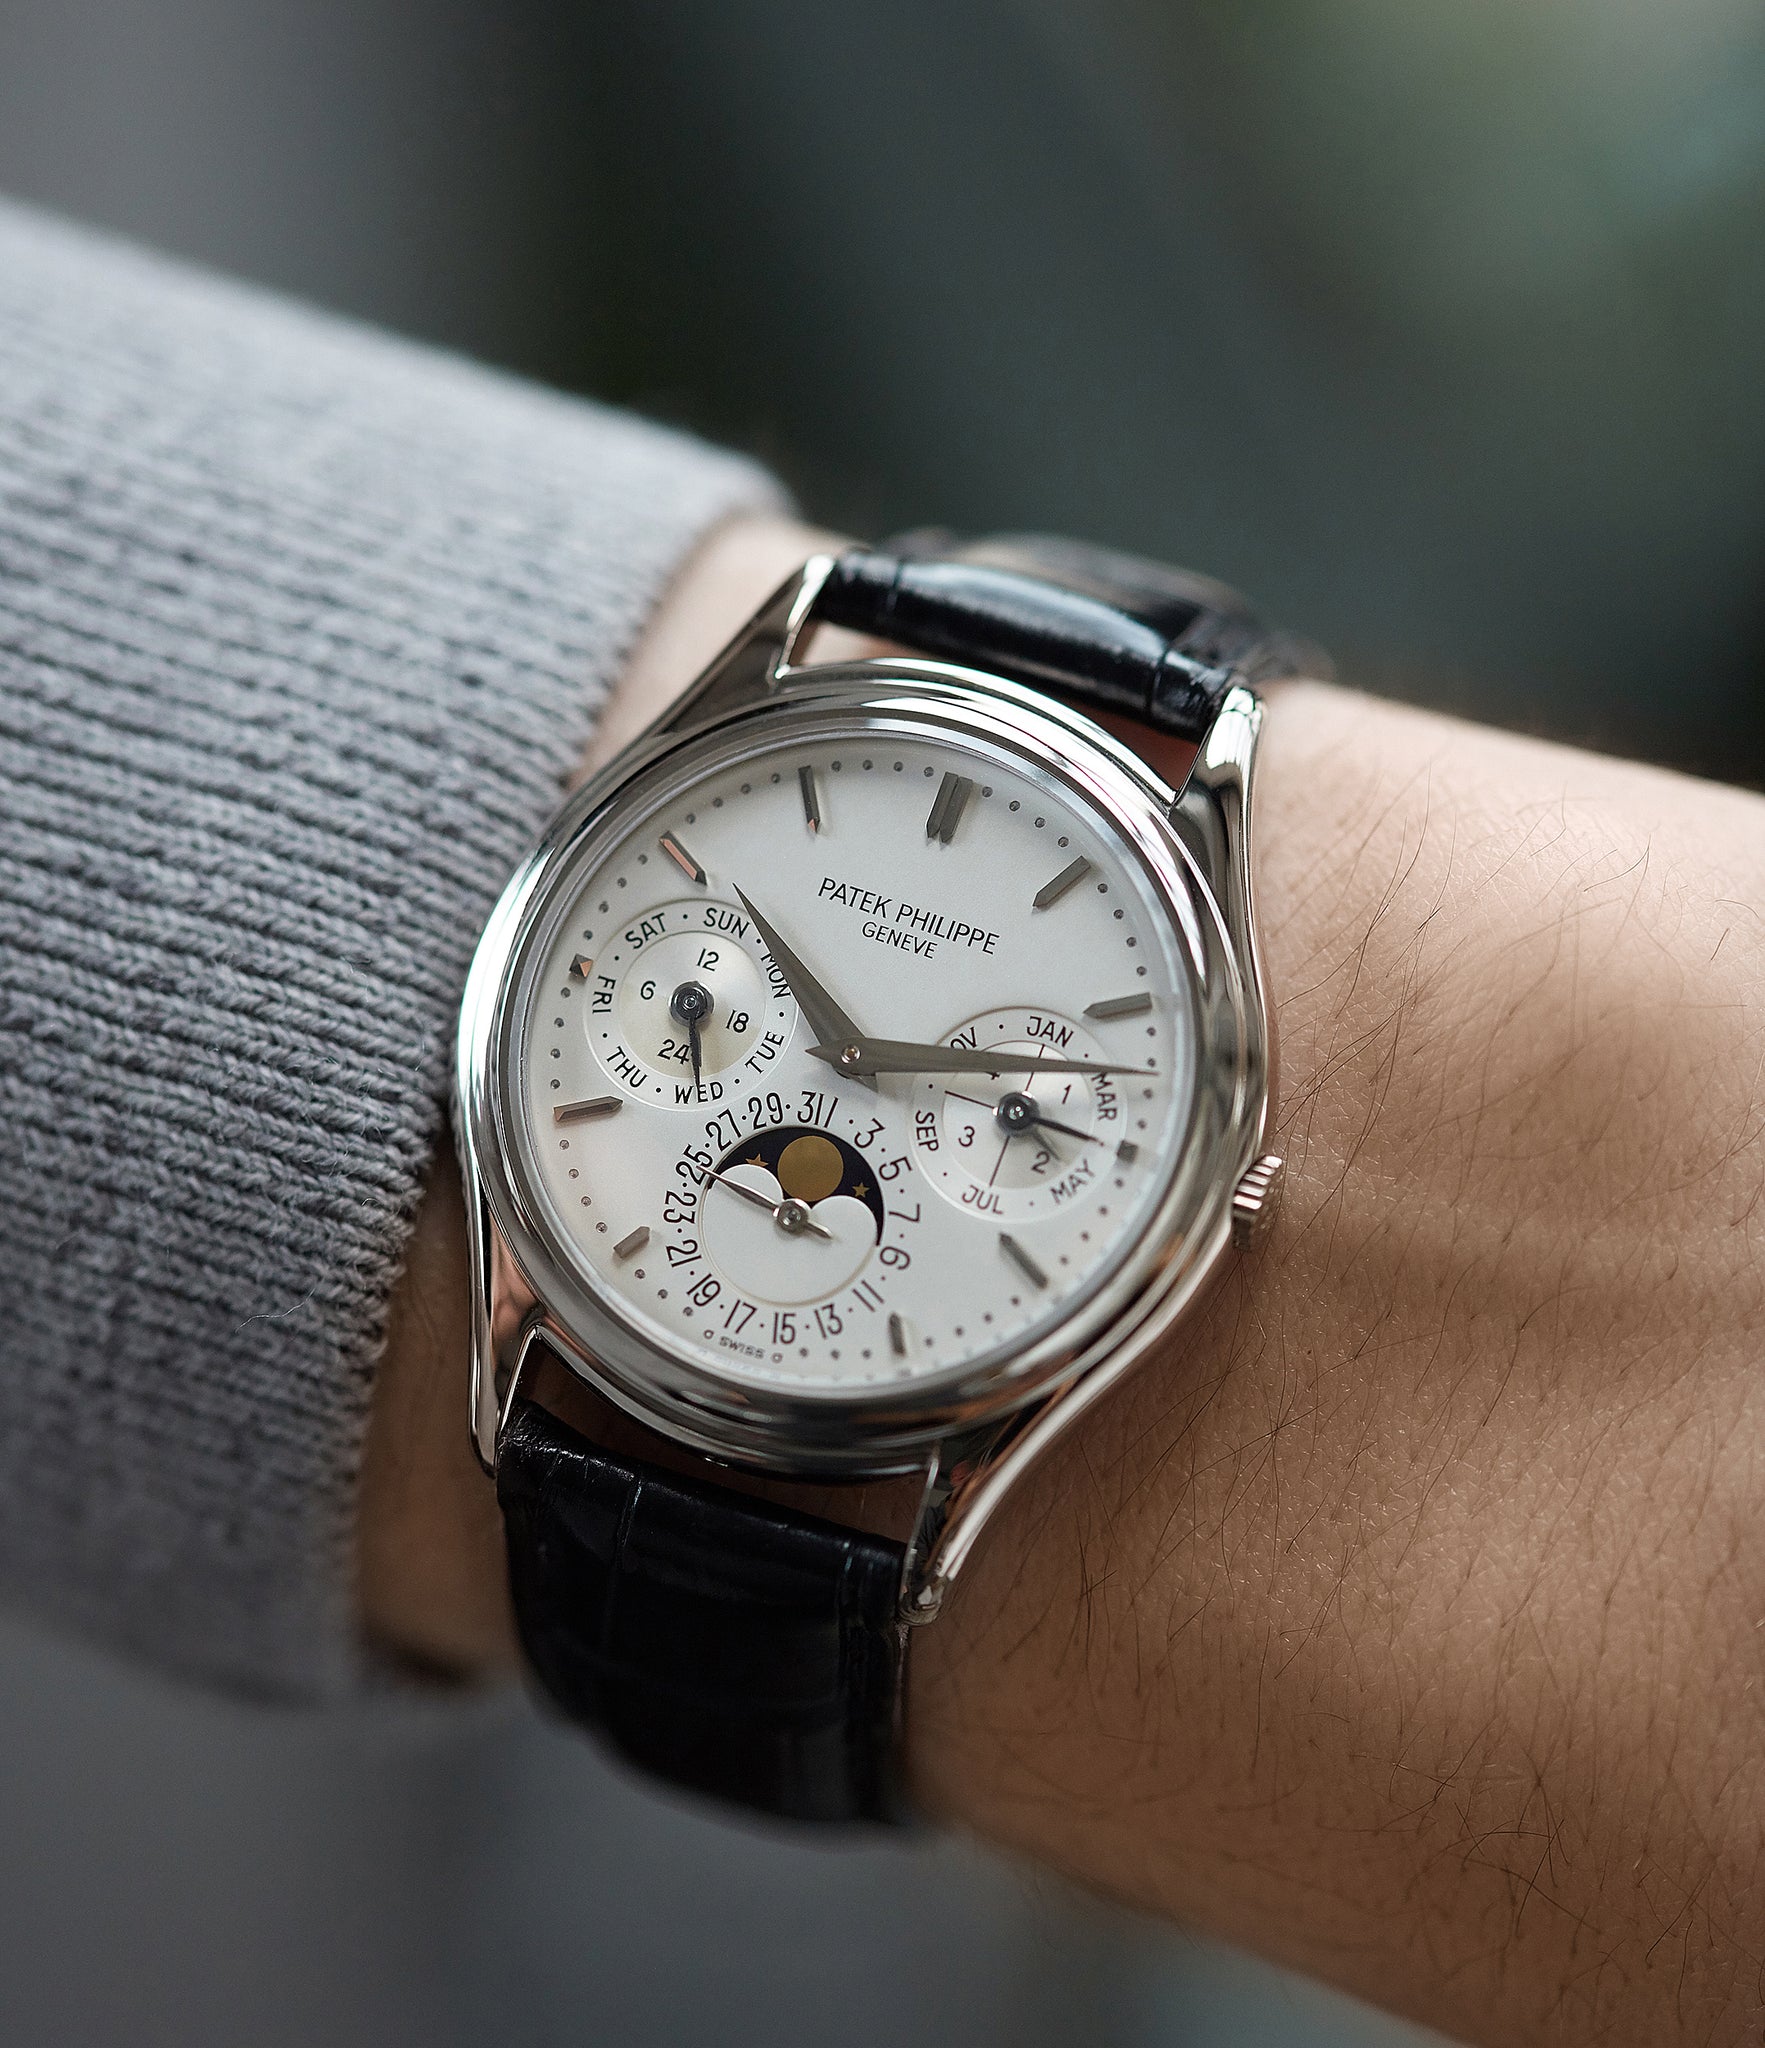 on the wrist Patek Philippe 3940G Perpetual Calendar vintage rare watch English dial for sale online at A Collected Man London UK specialist of rare watches